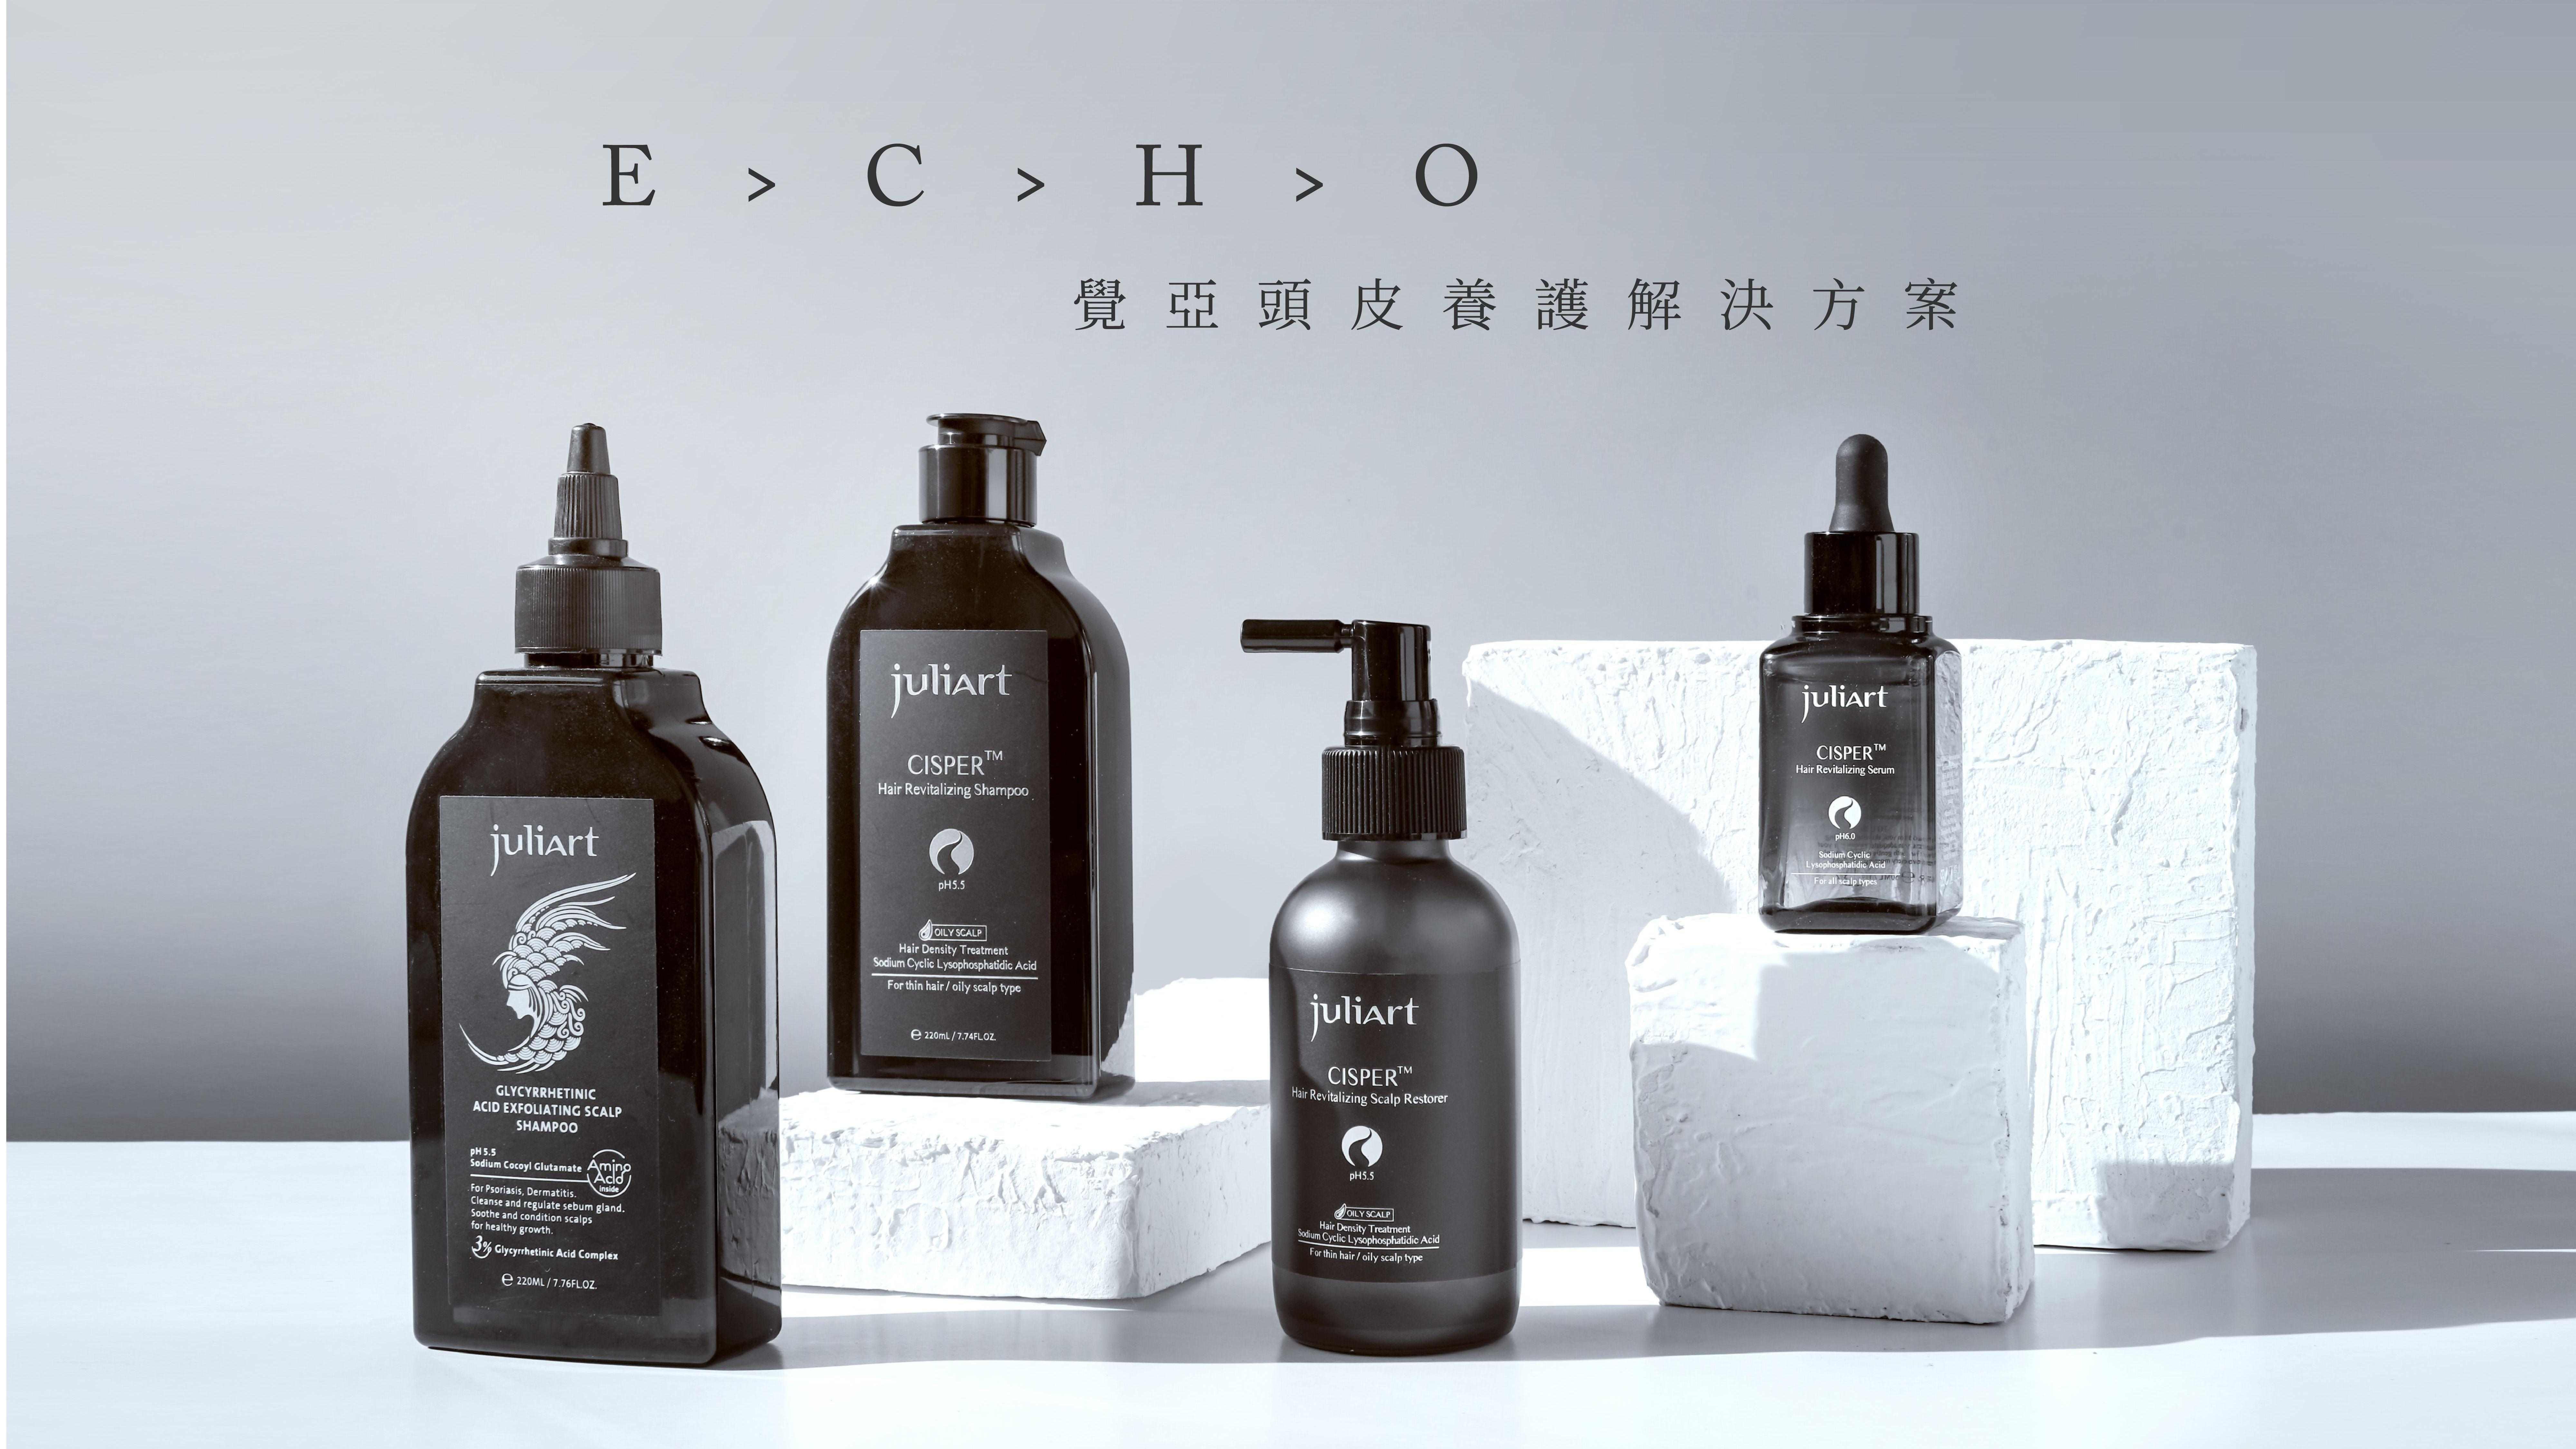 ECHO Scalp Care and Treatment Solution